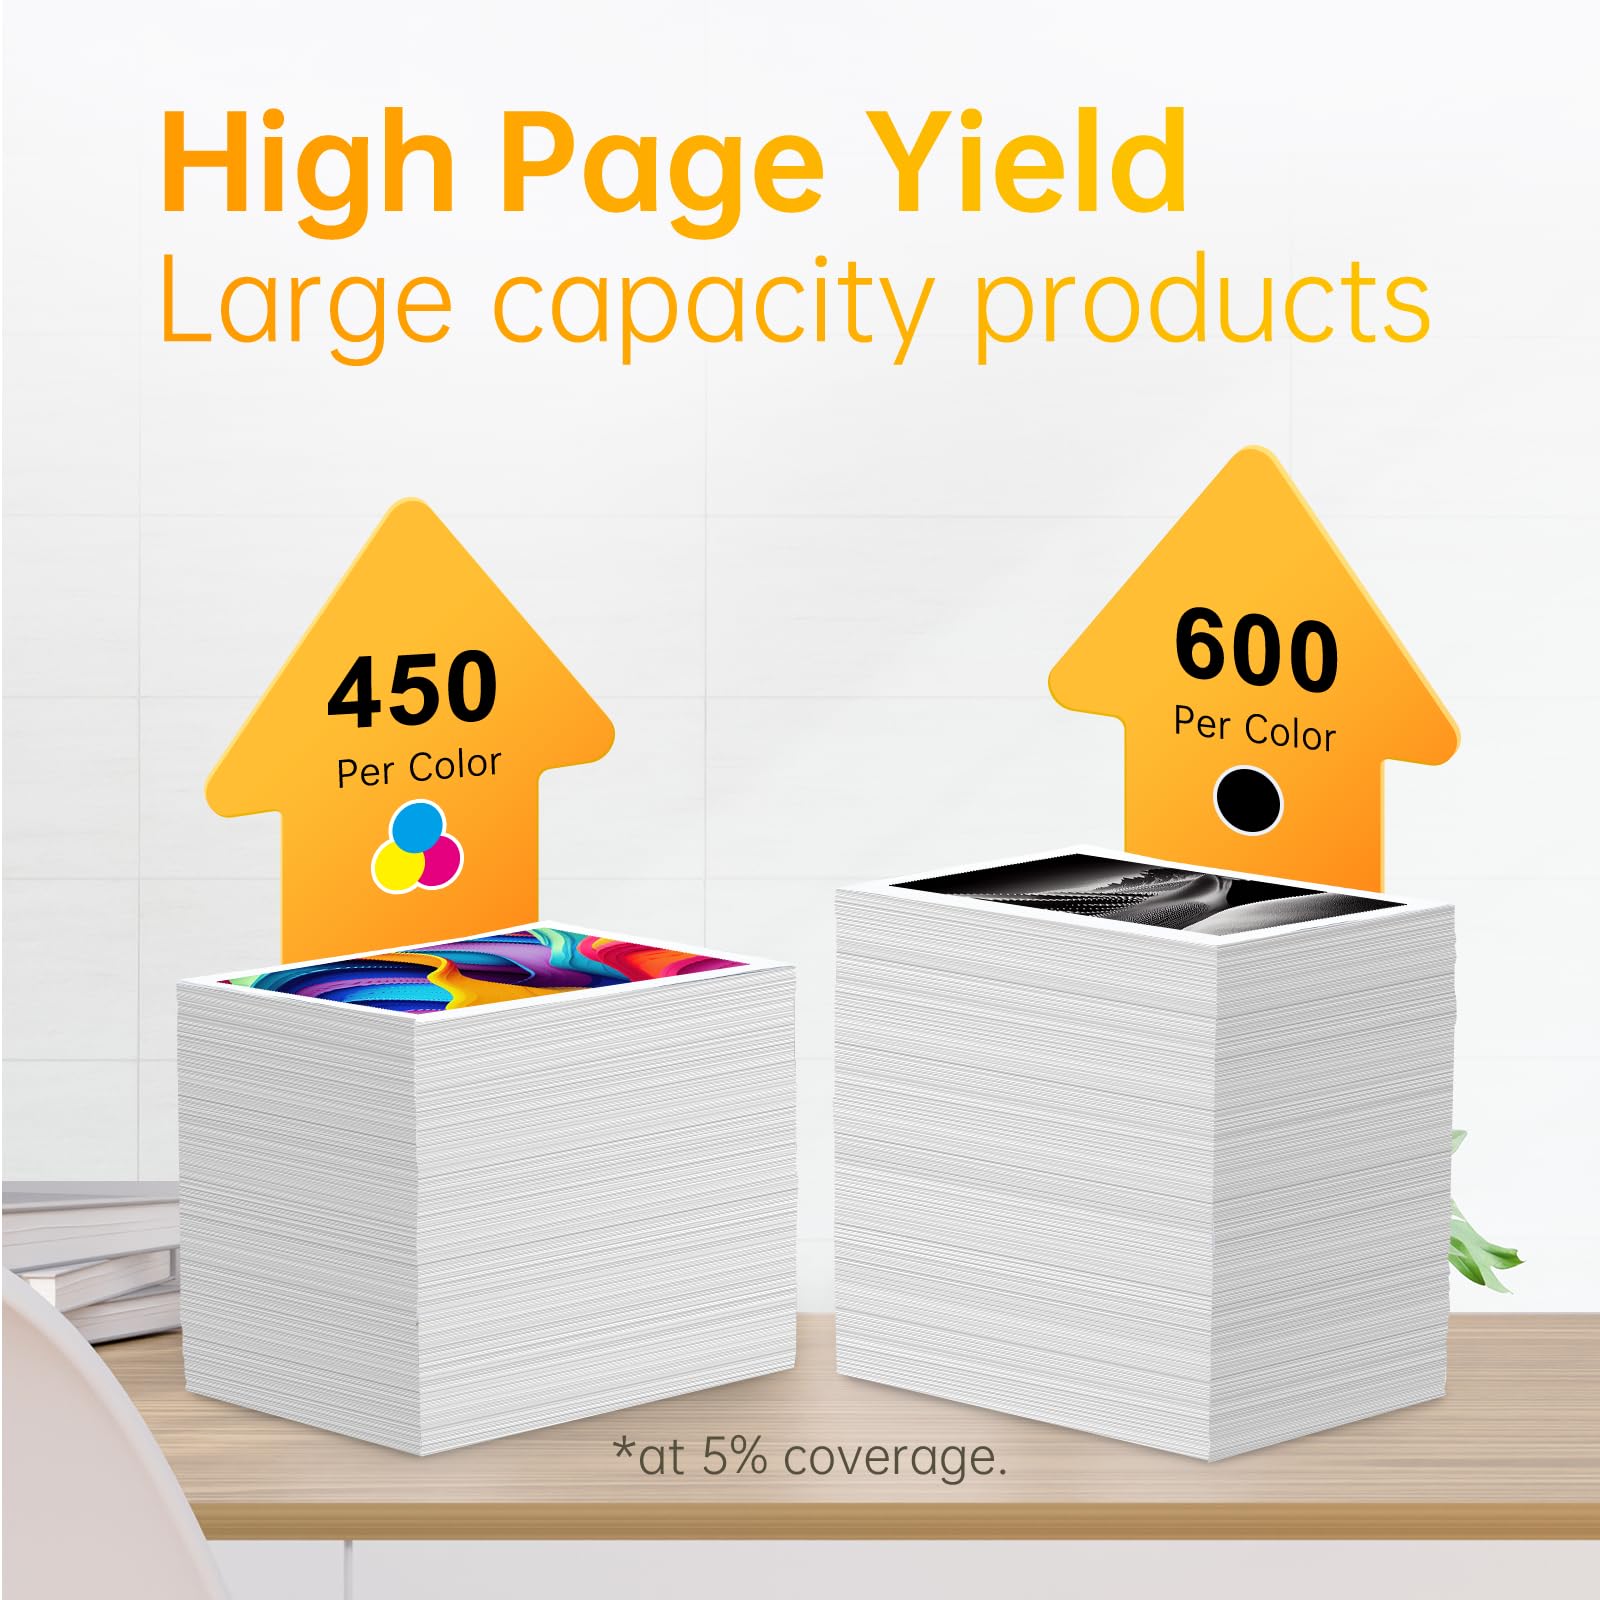 High page yield illustration for LEMERO 212XL ink cartridges, showcasing 600 pages per color cartridge at 5% coverage.